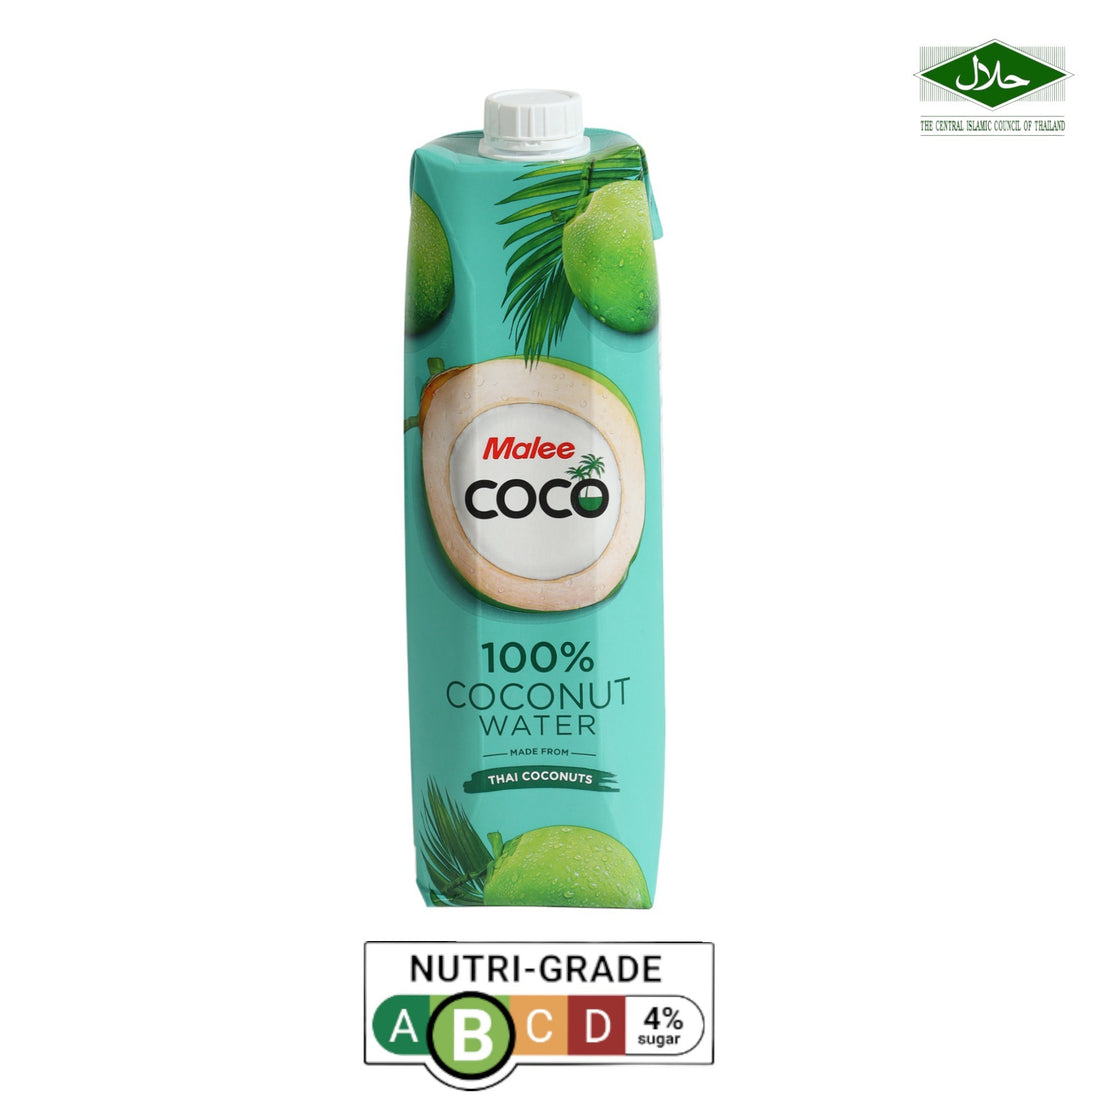 Malee Coco 100% Coconut Water 1000ml (2 For) (Exp Date:16/05/2025)